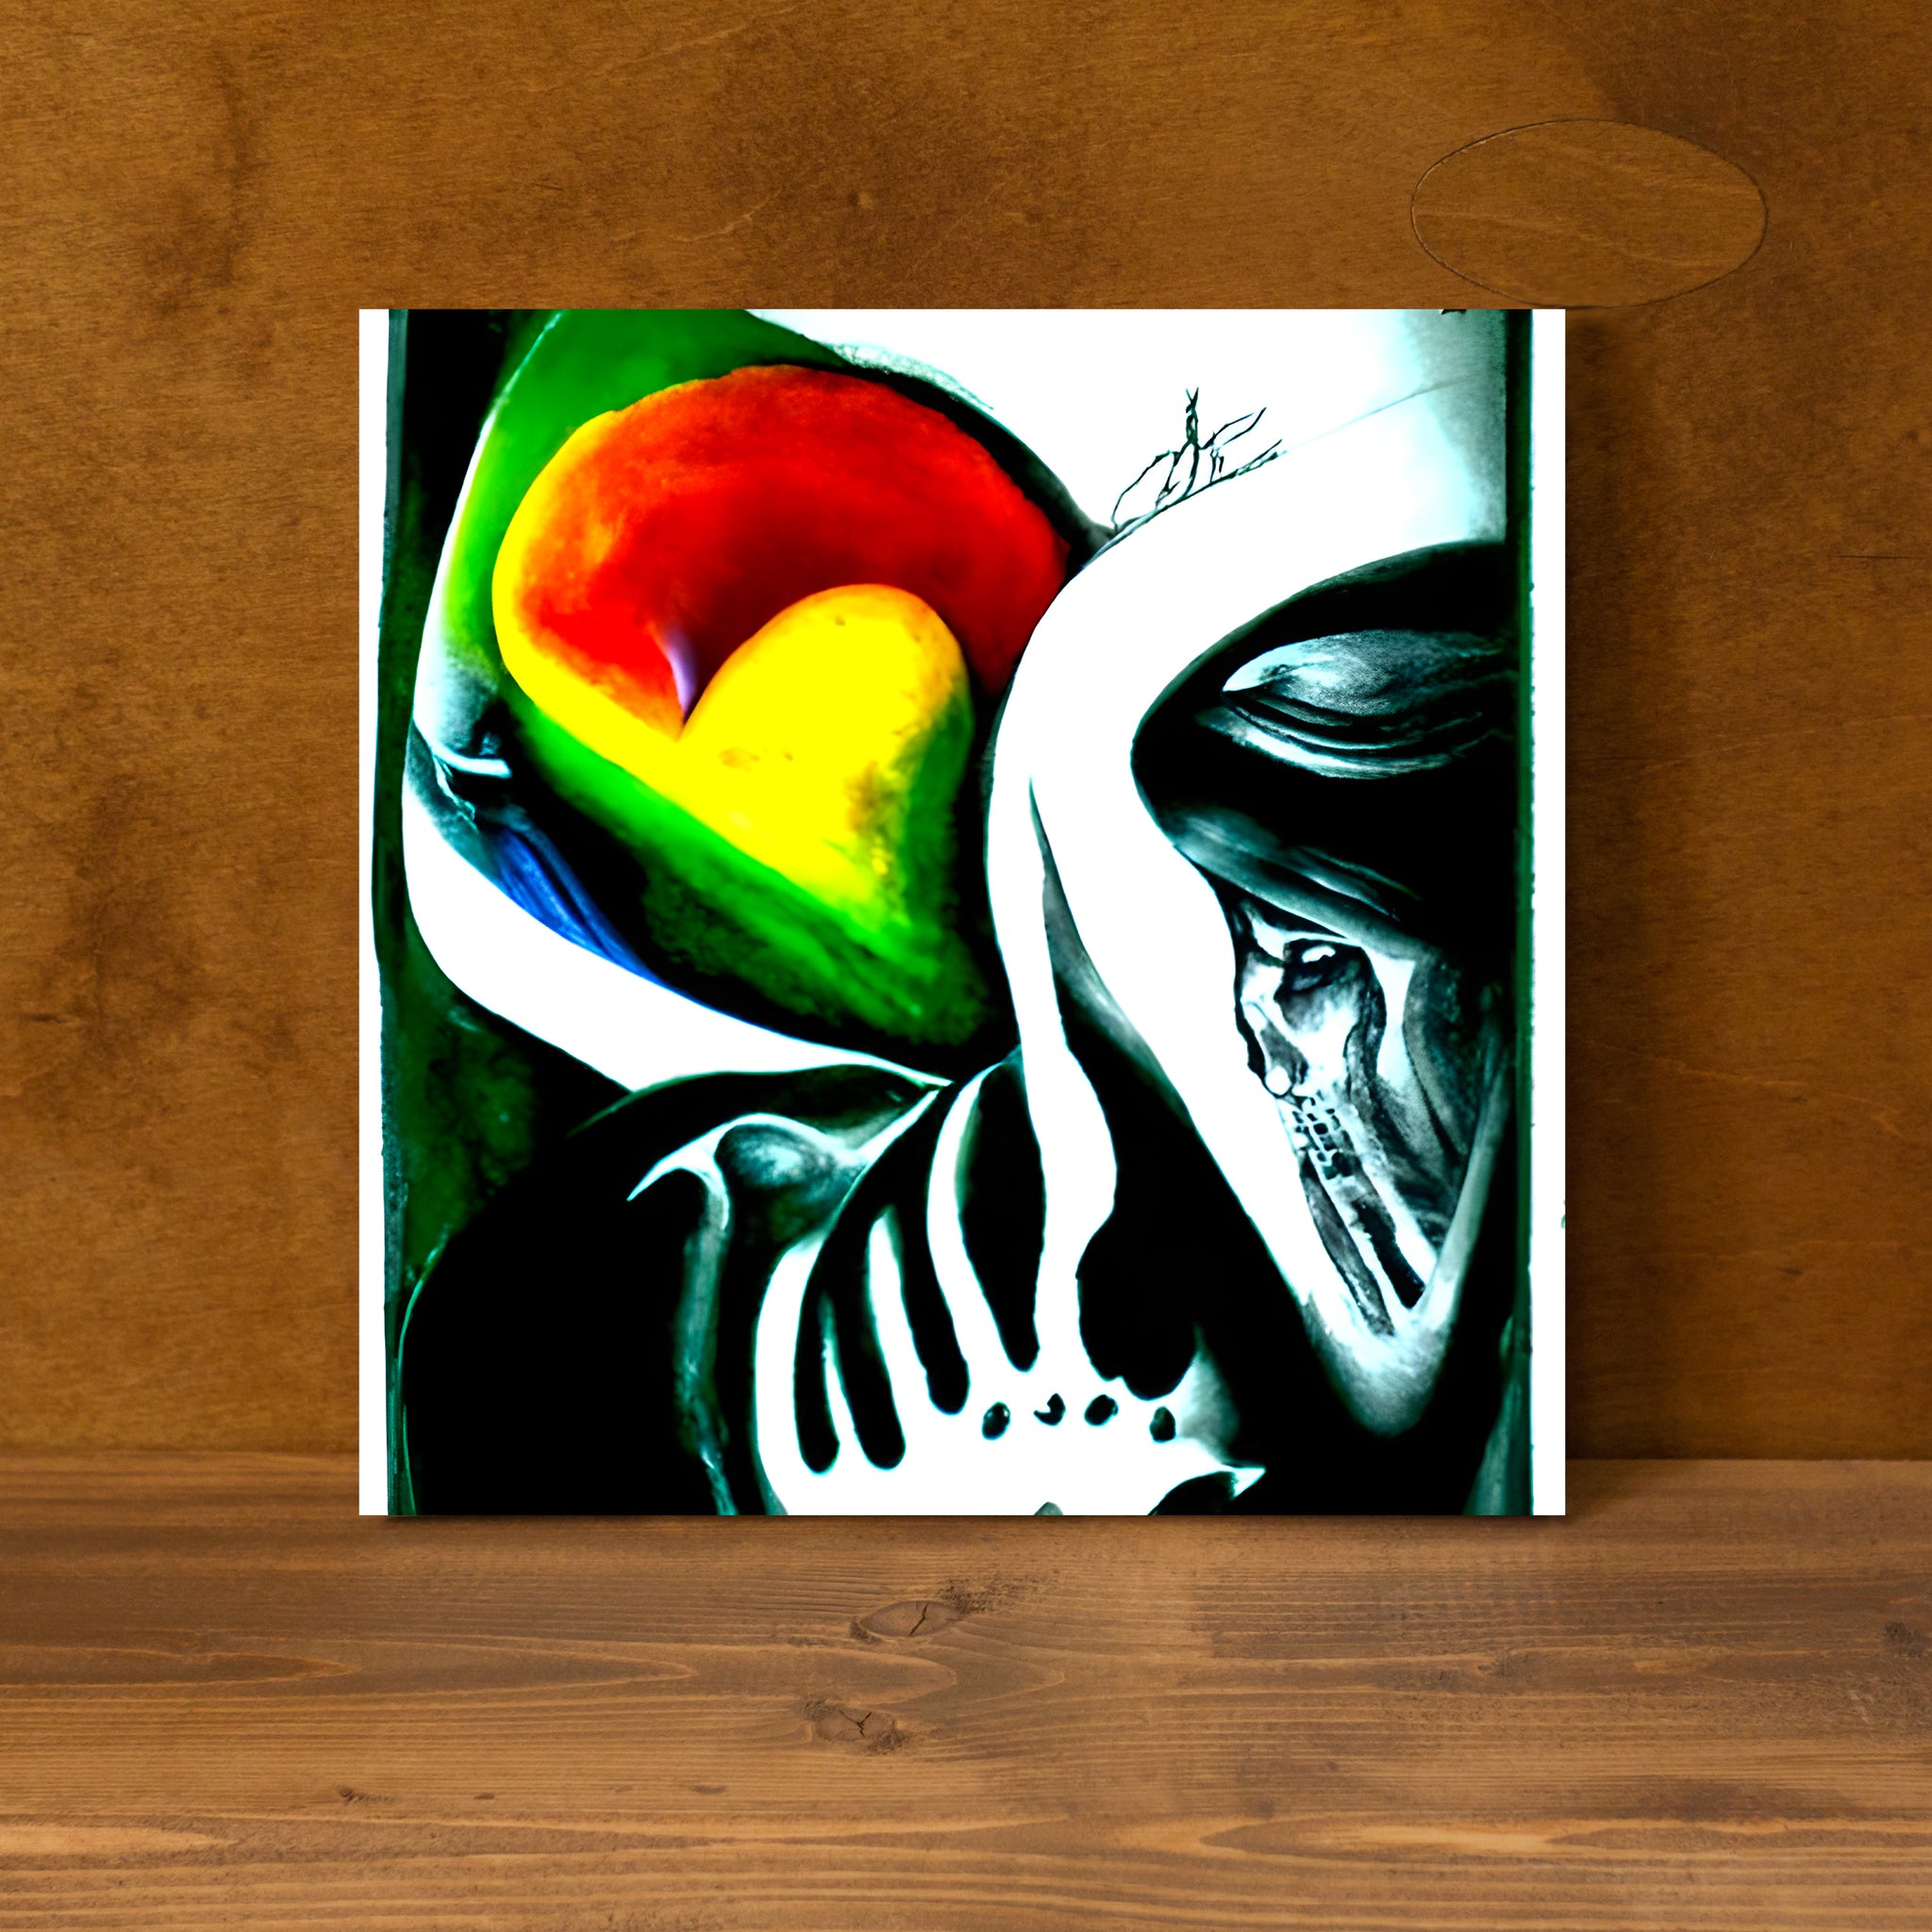 Death does not part, only the lack of love Sugar Skull infinity charcoal drawing colourful